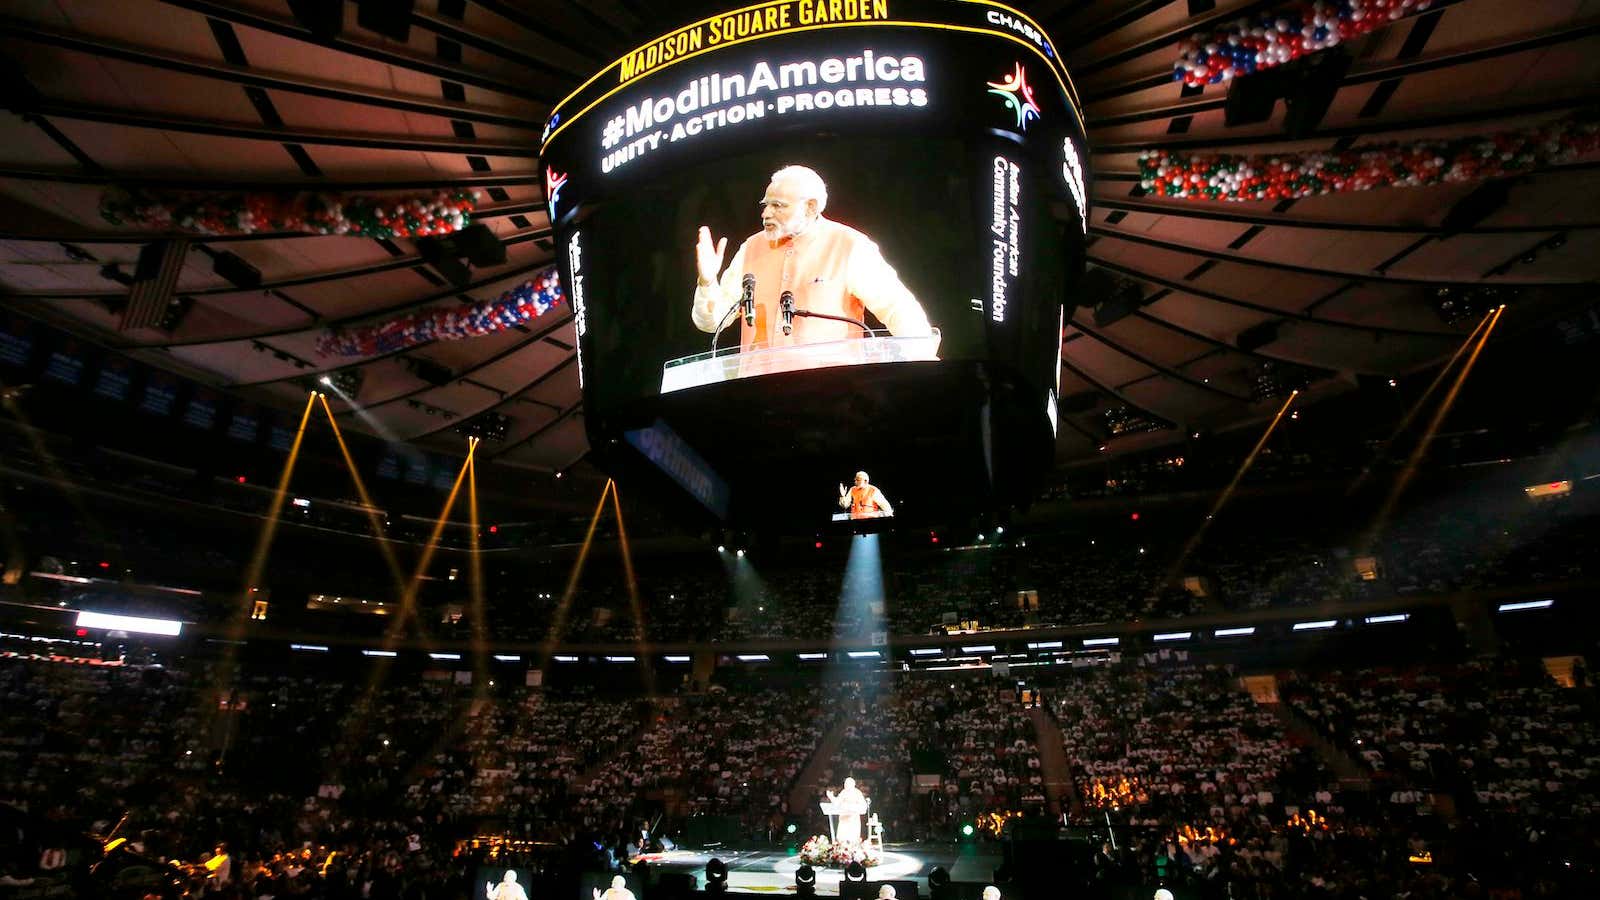 The word from Madison Square Garden would have reached Obama.